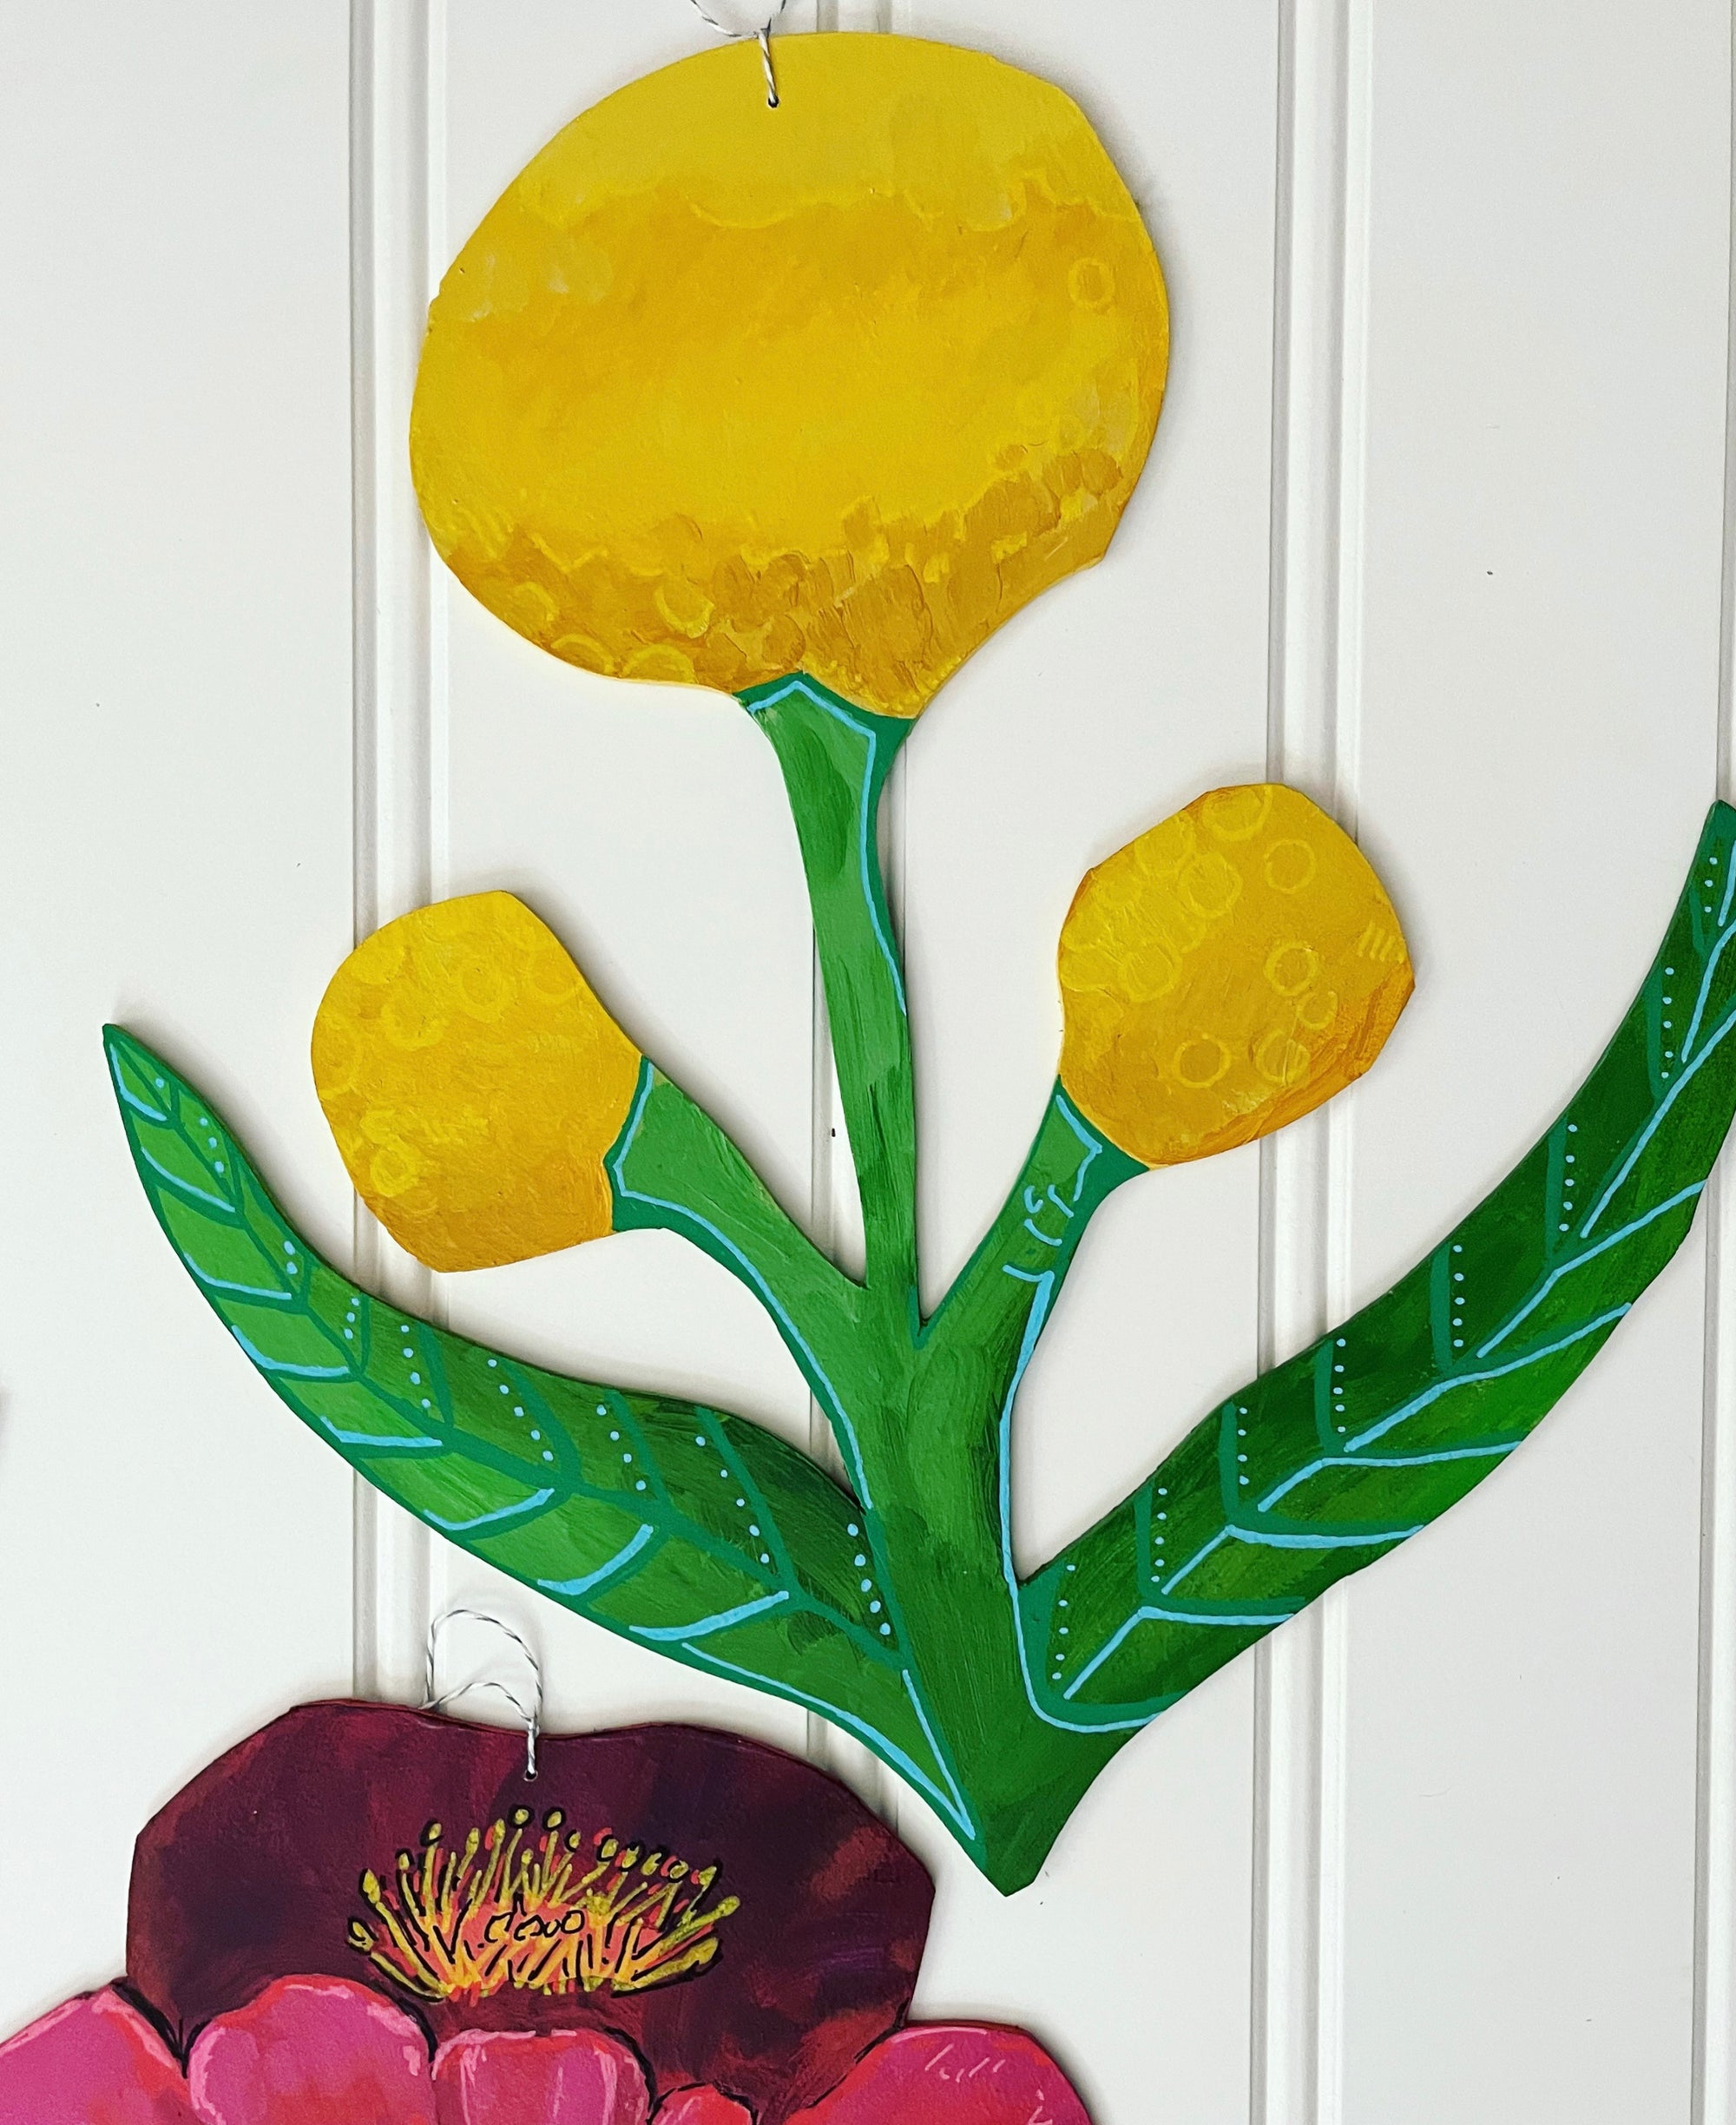 cutout wooden flower painting, by artist Abigail Gray Swartz. three yellow flowers, acrylic on panel.